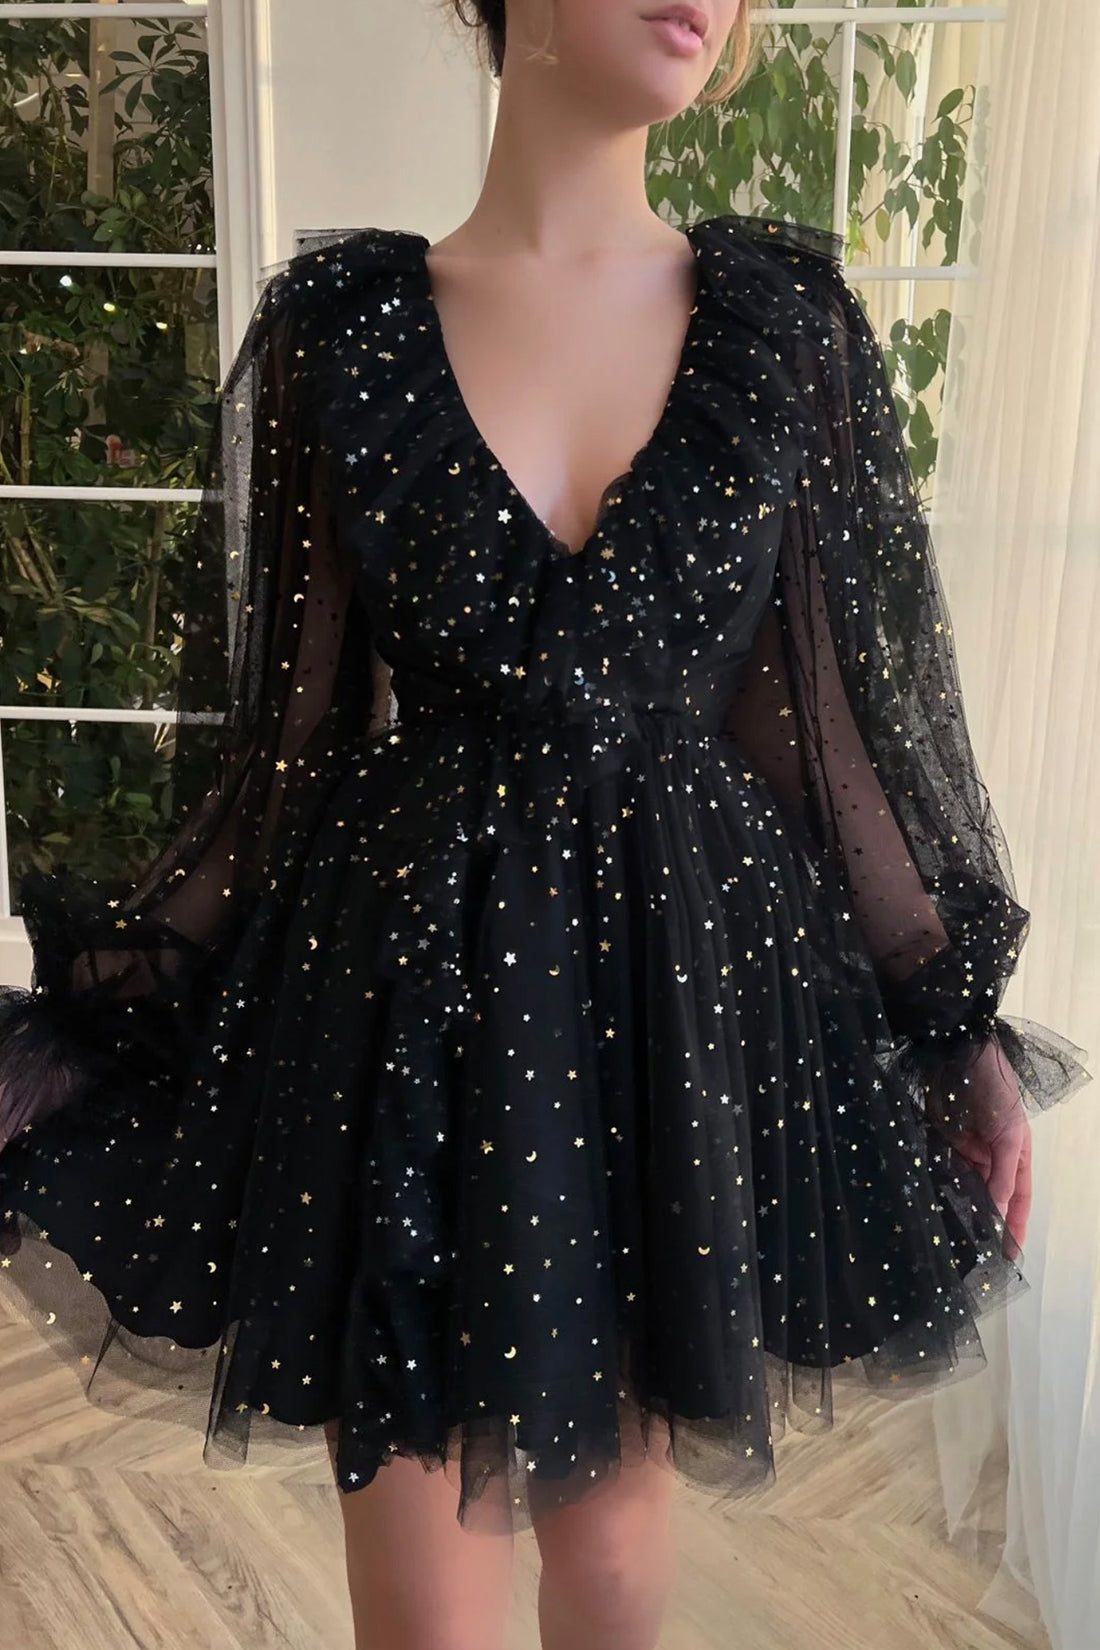 Black V-Neck Tulle Short Prom Dress, Cute Long Sleeve Homecoming Party Dress